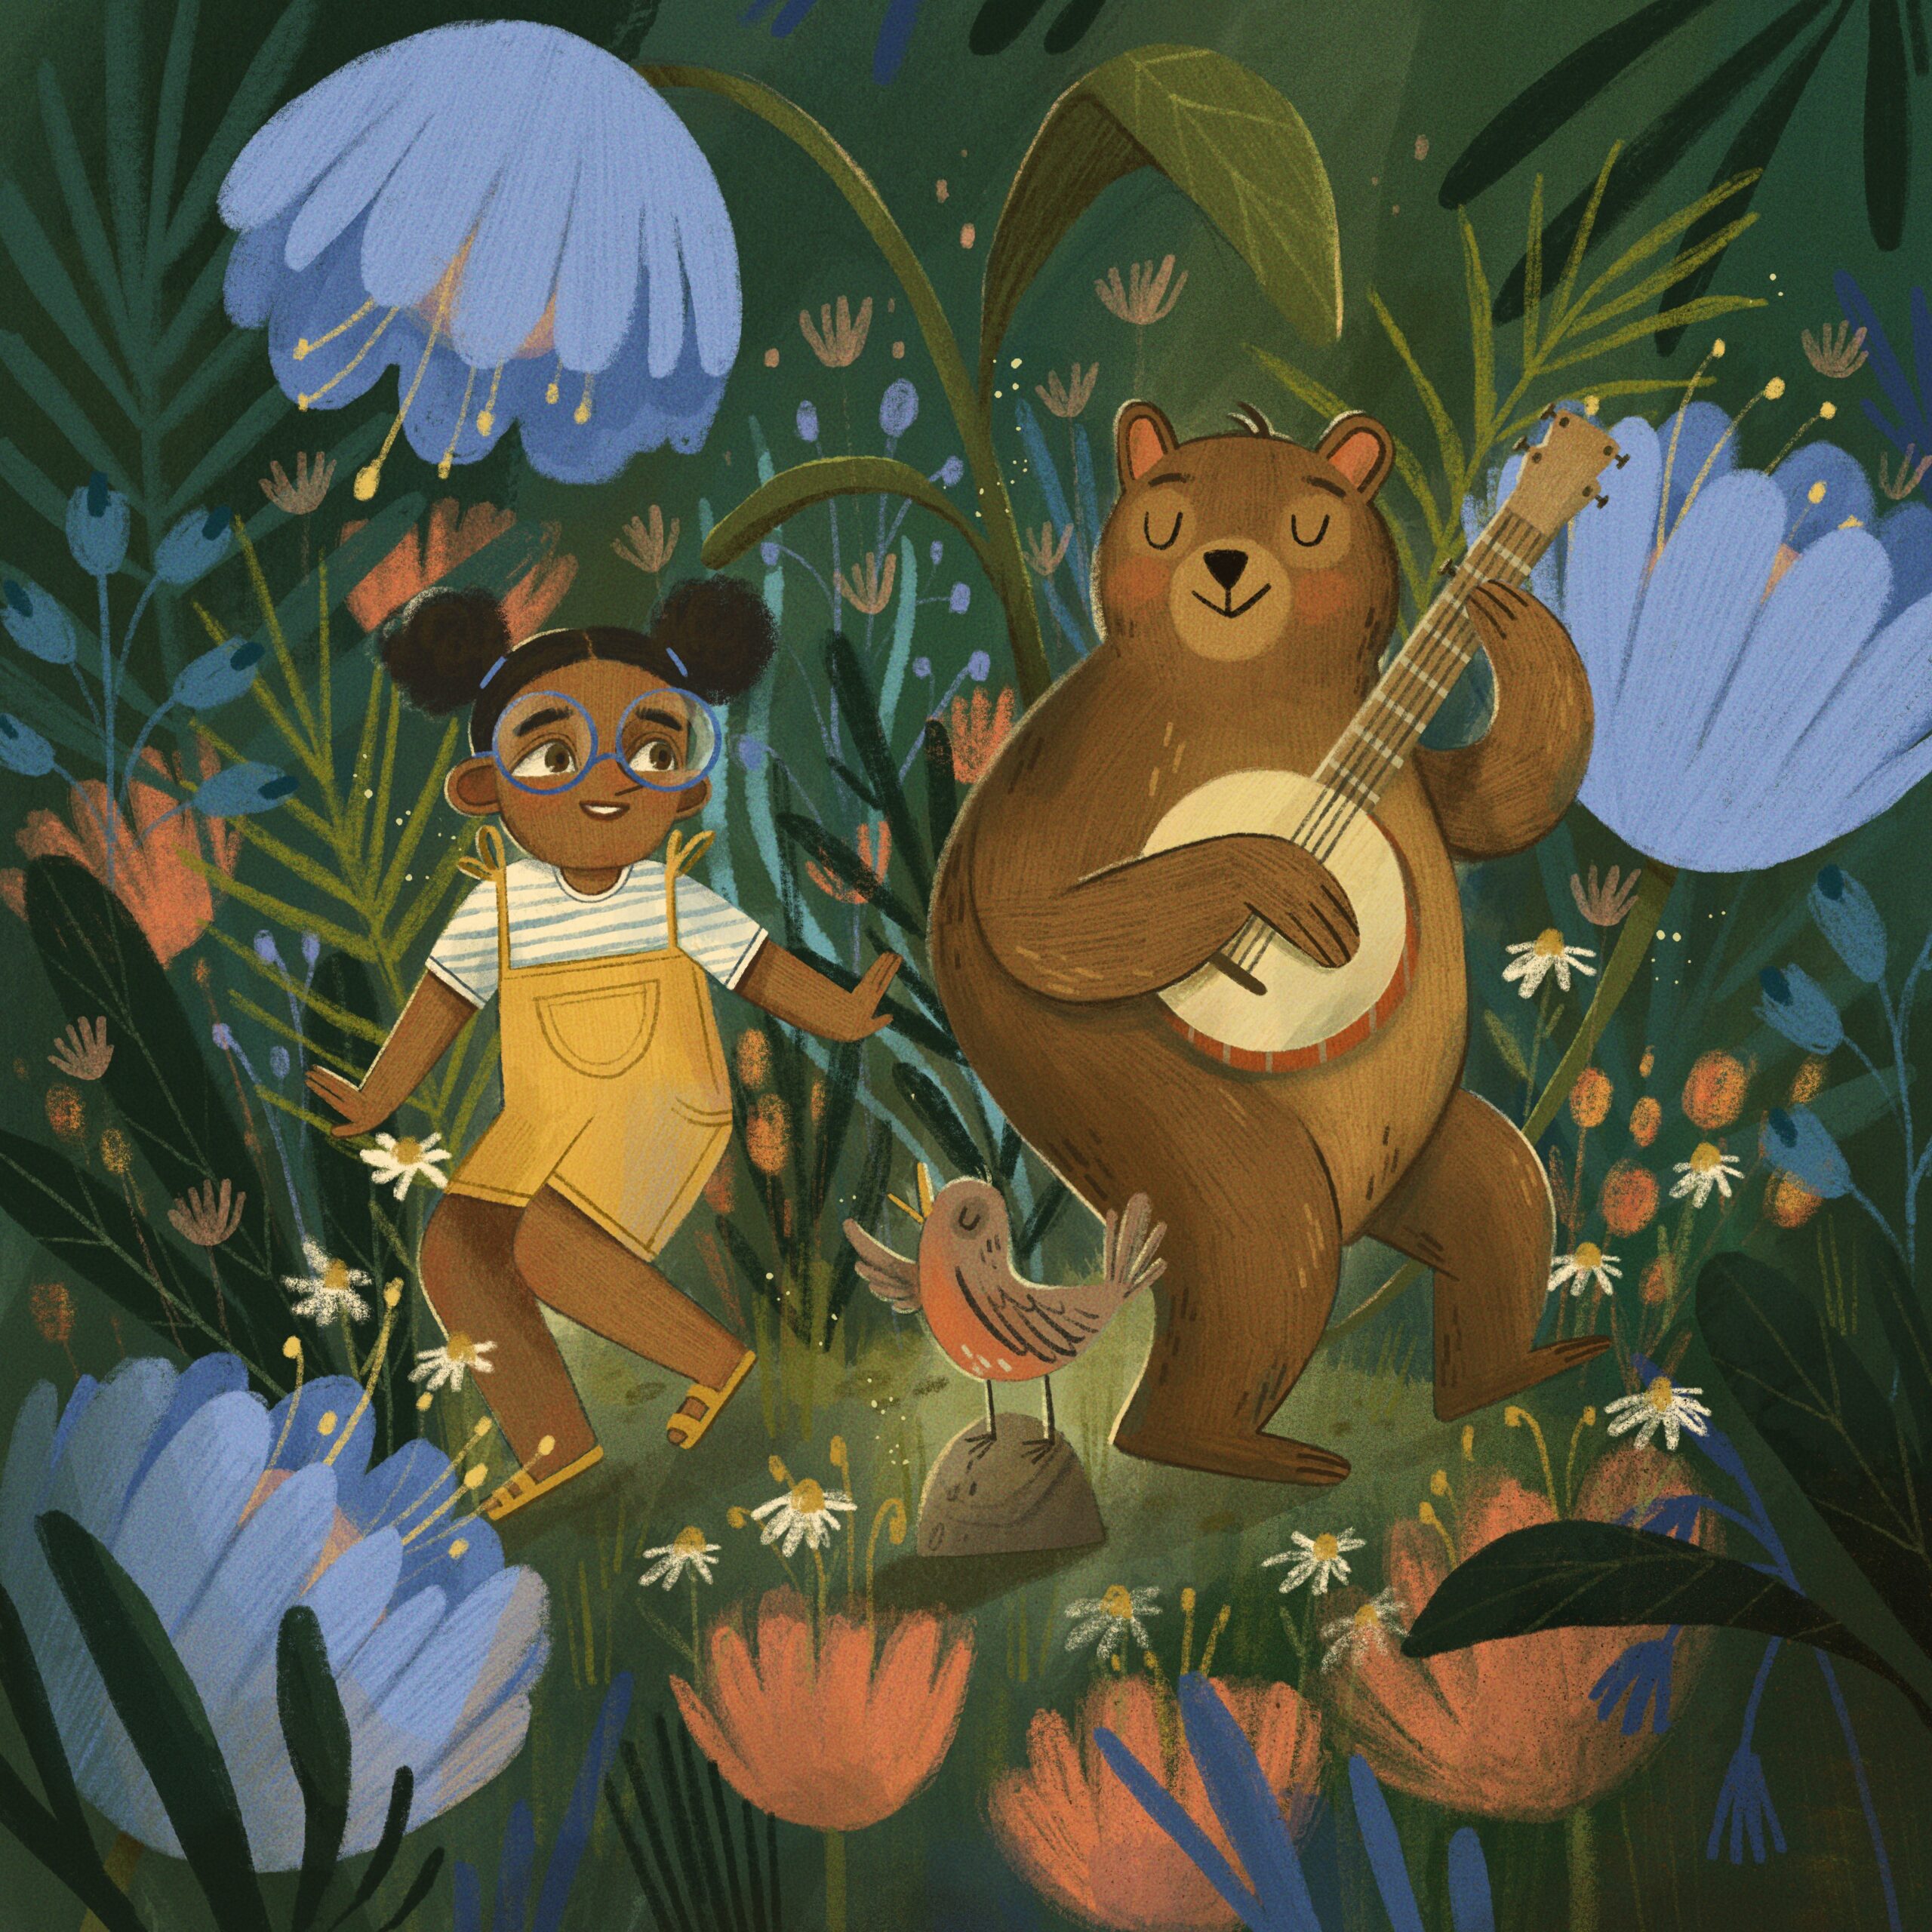 An illustration by BC SRC artist Meneka Repka featuring a girl and a bear playing a banjo dancing together